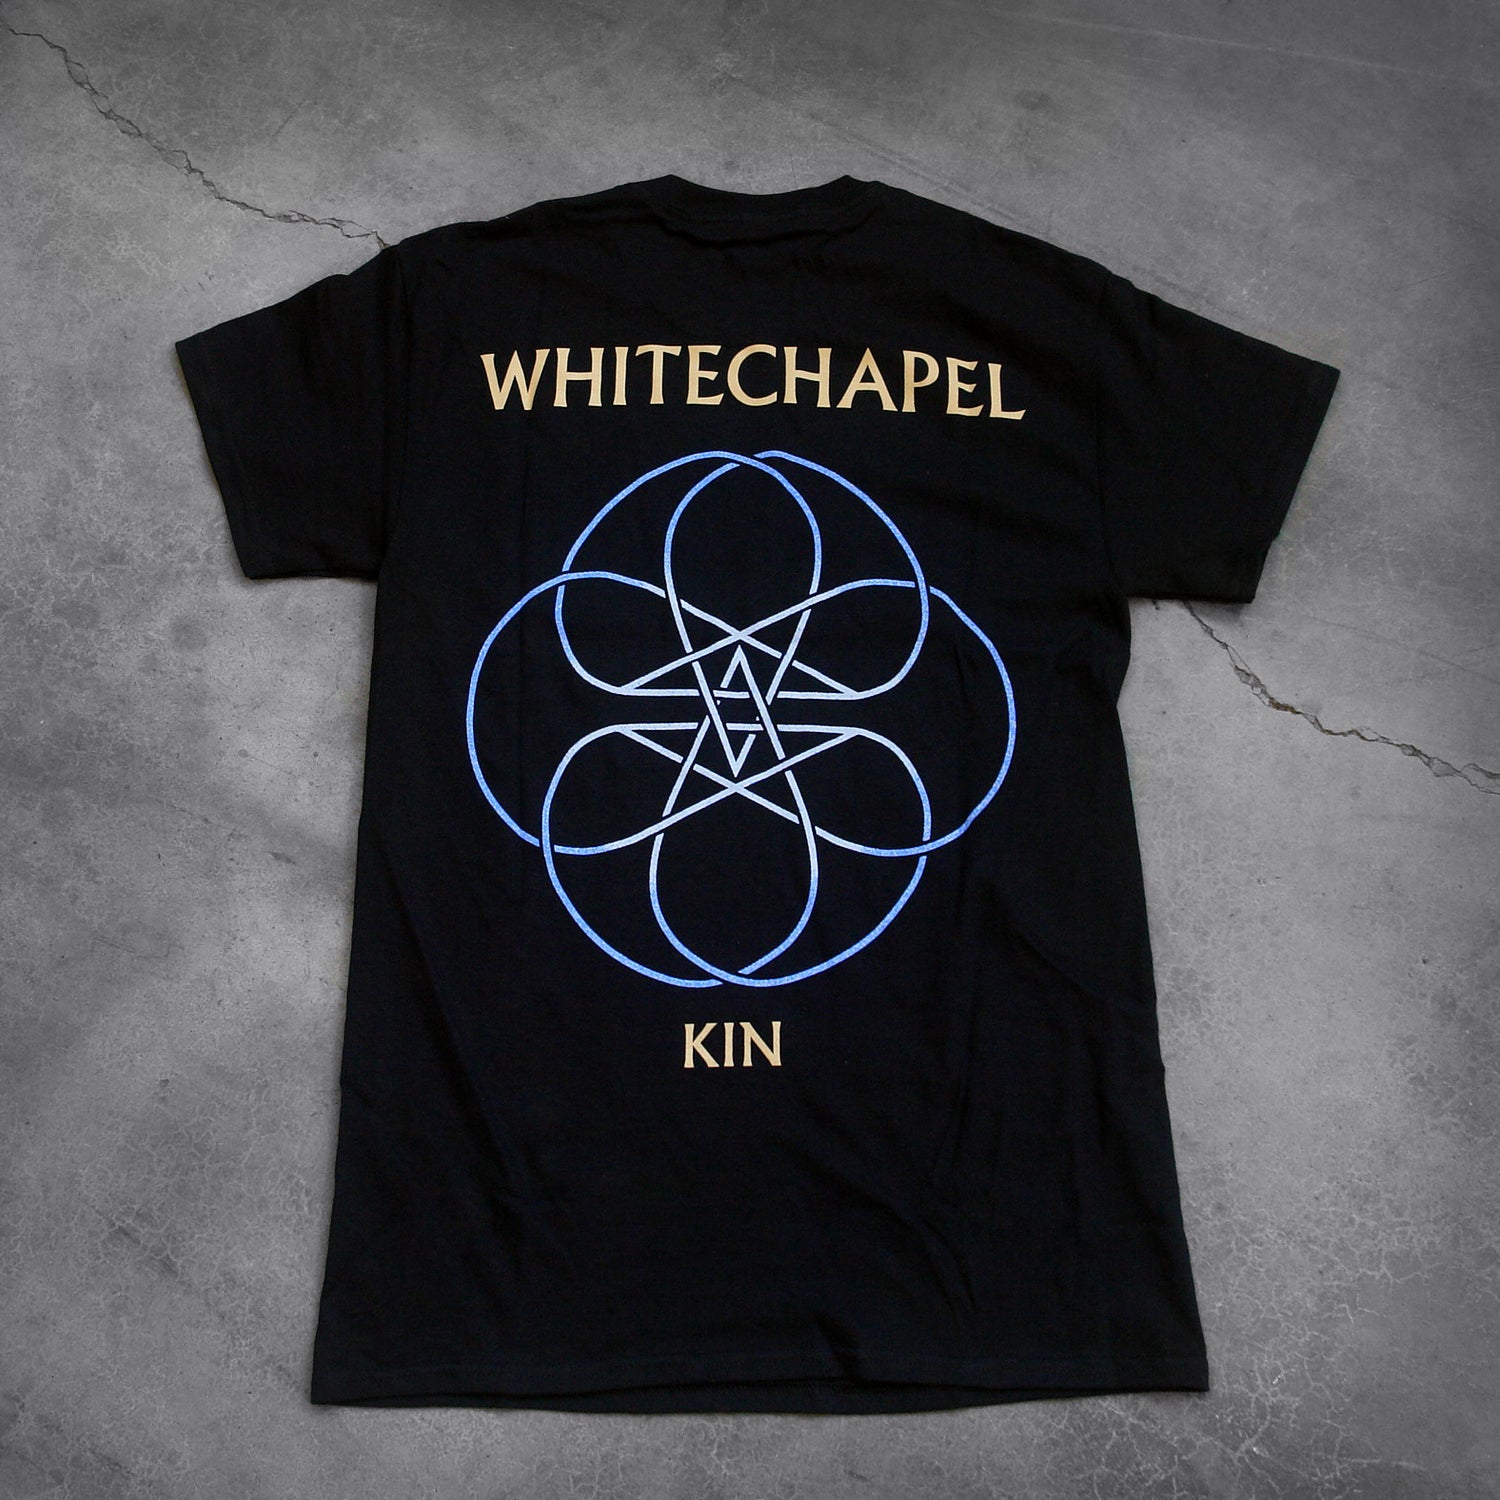 image of the back of a black tee shirt on a cracked concrete background. The back reads "whitechapel" across the shoulders in tan text. Below this is an abstract thin lined pattern in white and blue. It looks like a circle with lines and stars in the center. Below this in tan text reads "kin".